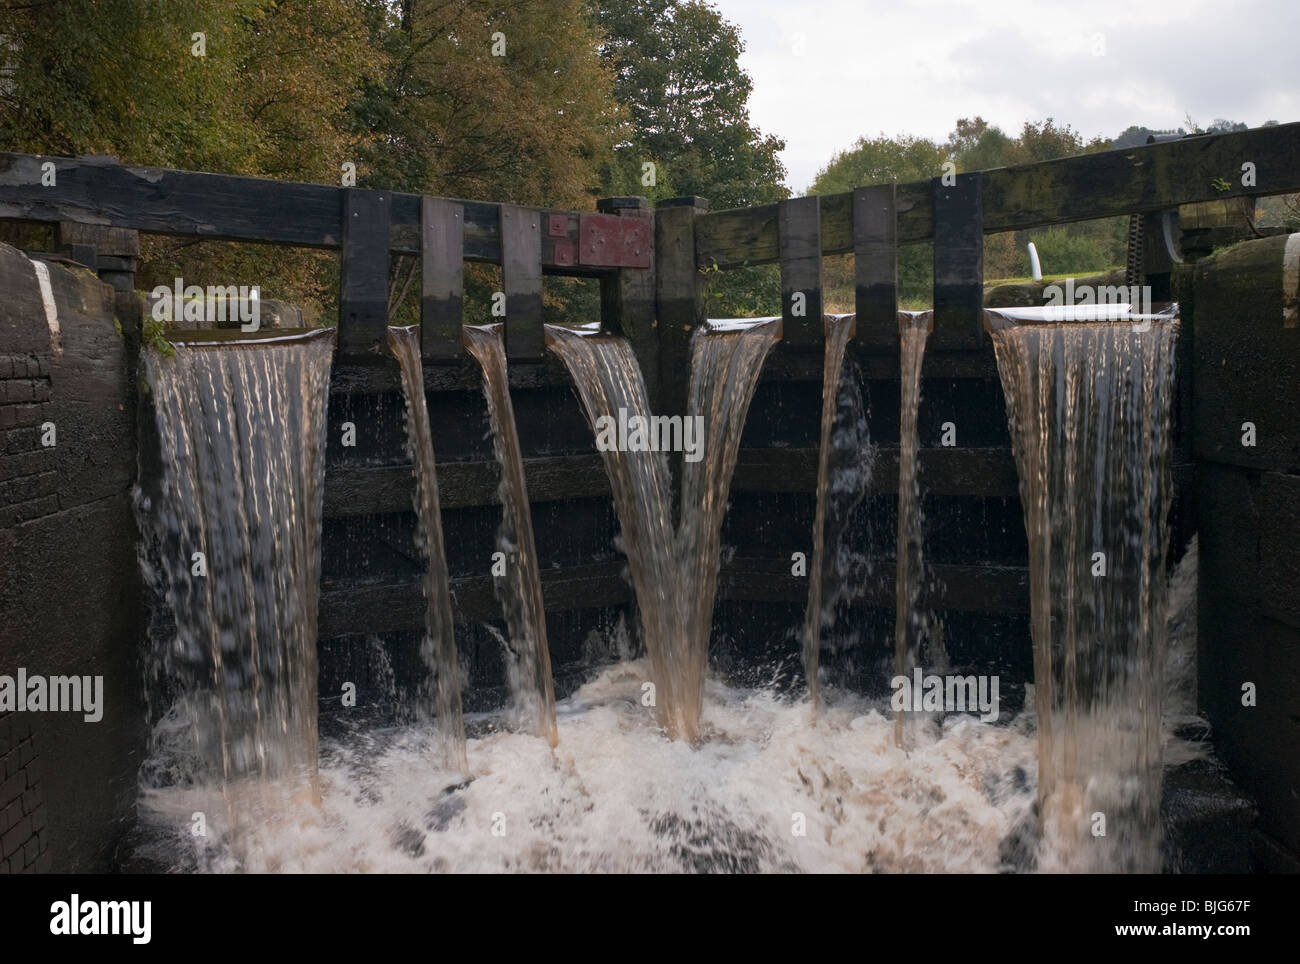 Water cascades through 'overflow' gates of a lock on the Rochdale canal, Yorkshire, UK. Stock Photo